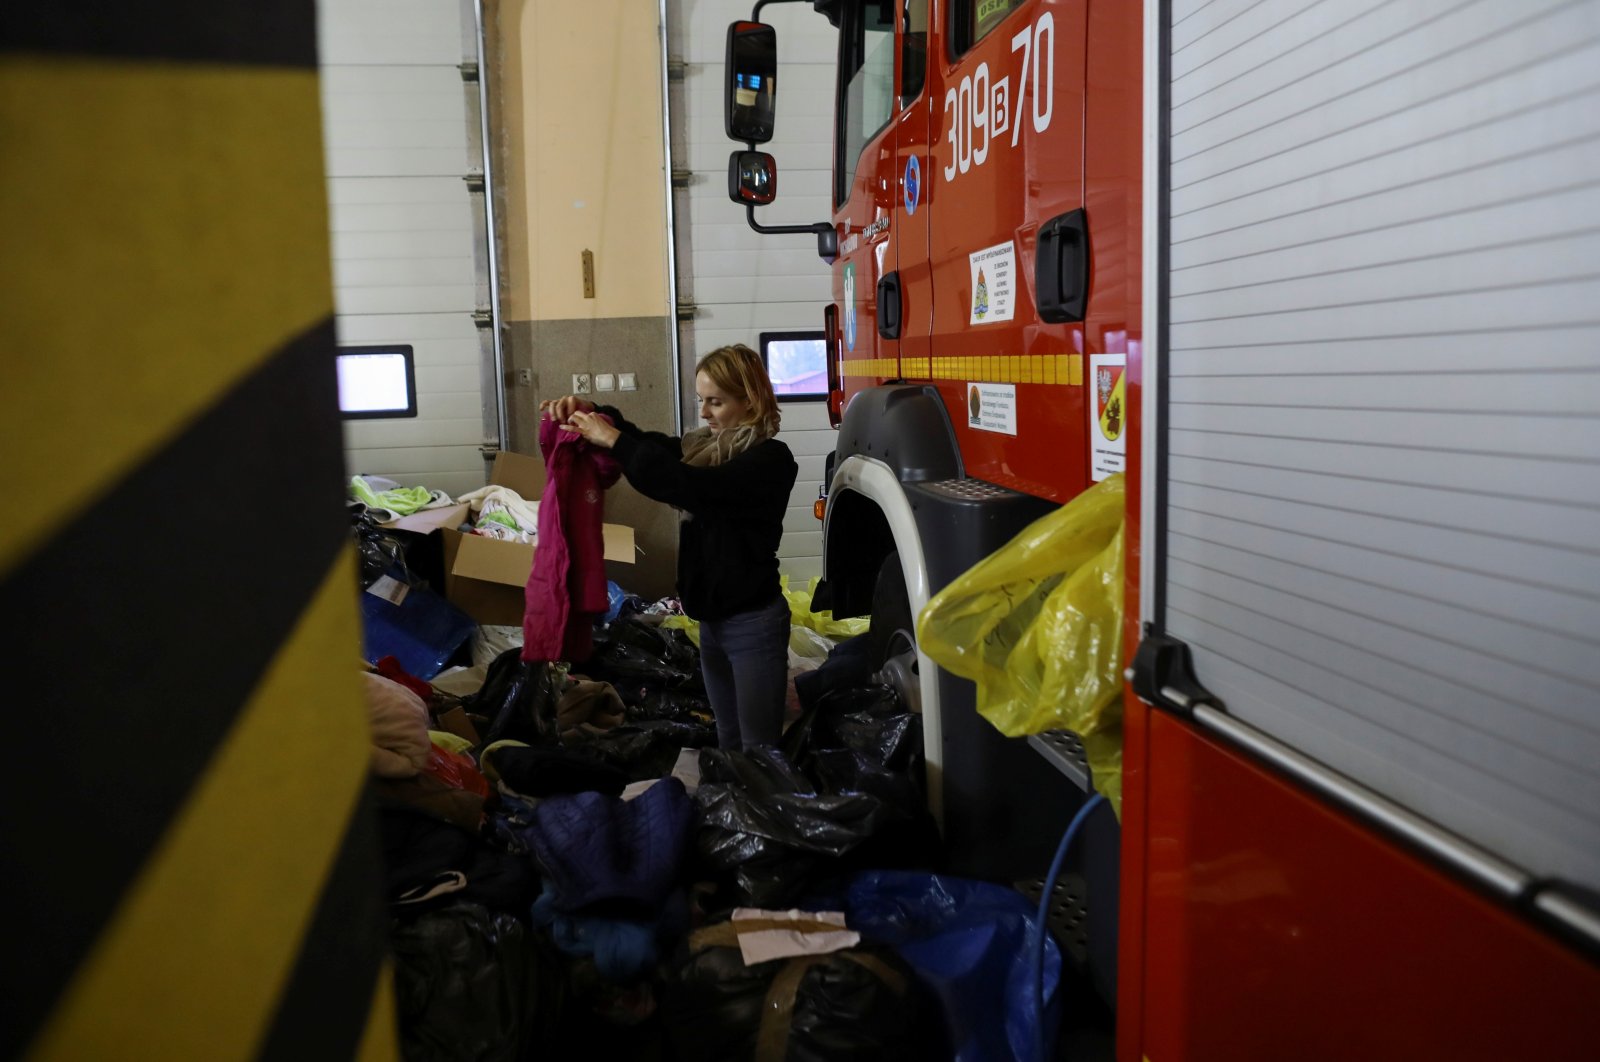 A volunteer sorts clothes for migrants at a fire station that opened its doors for migrants during the migrant crisis on the Belarusian-Polish border, Michalowo, Poland, Nov. 11, 2021. (Reuters Photo)